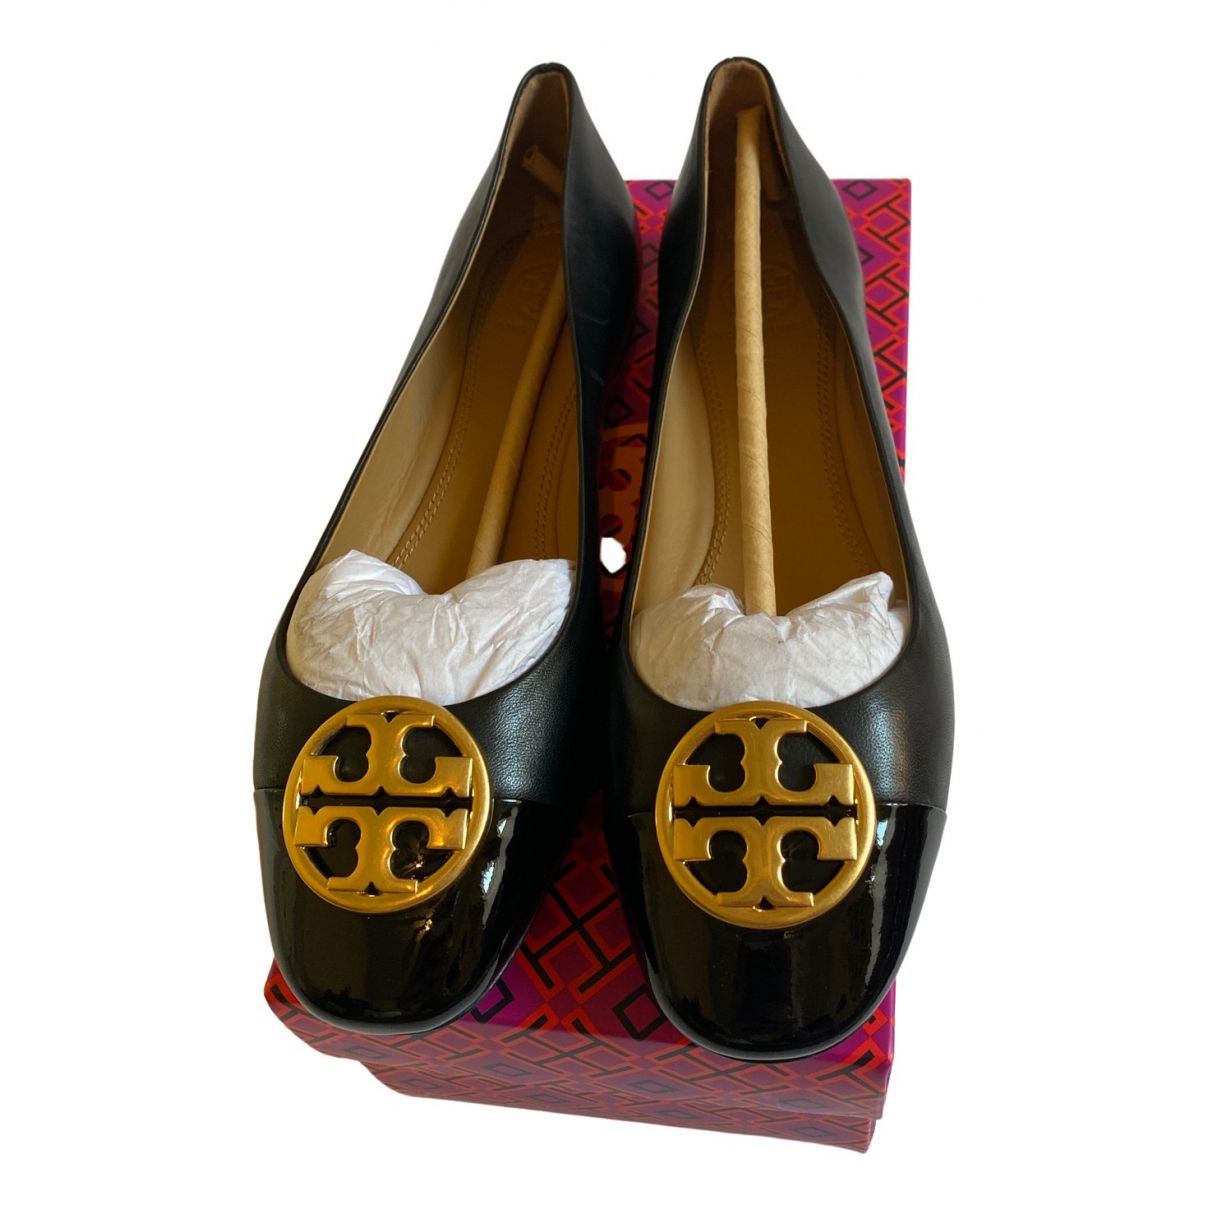 Leather ballet flats Tory Burch Black size 7 US in Leather - 23205026